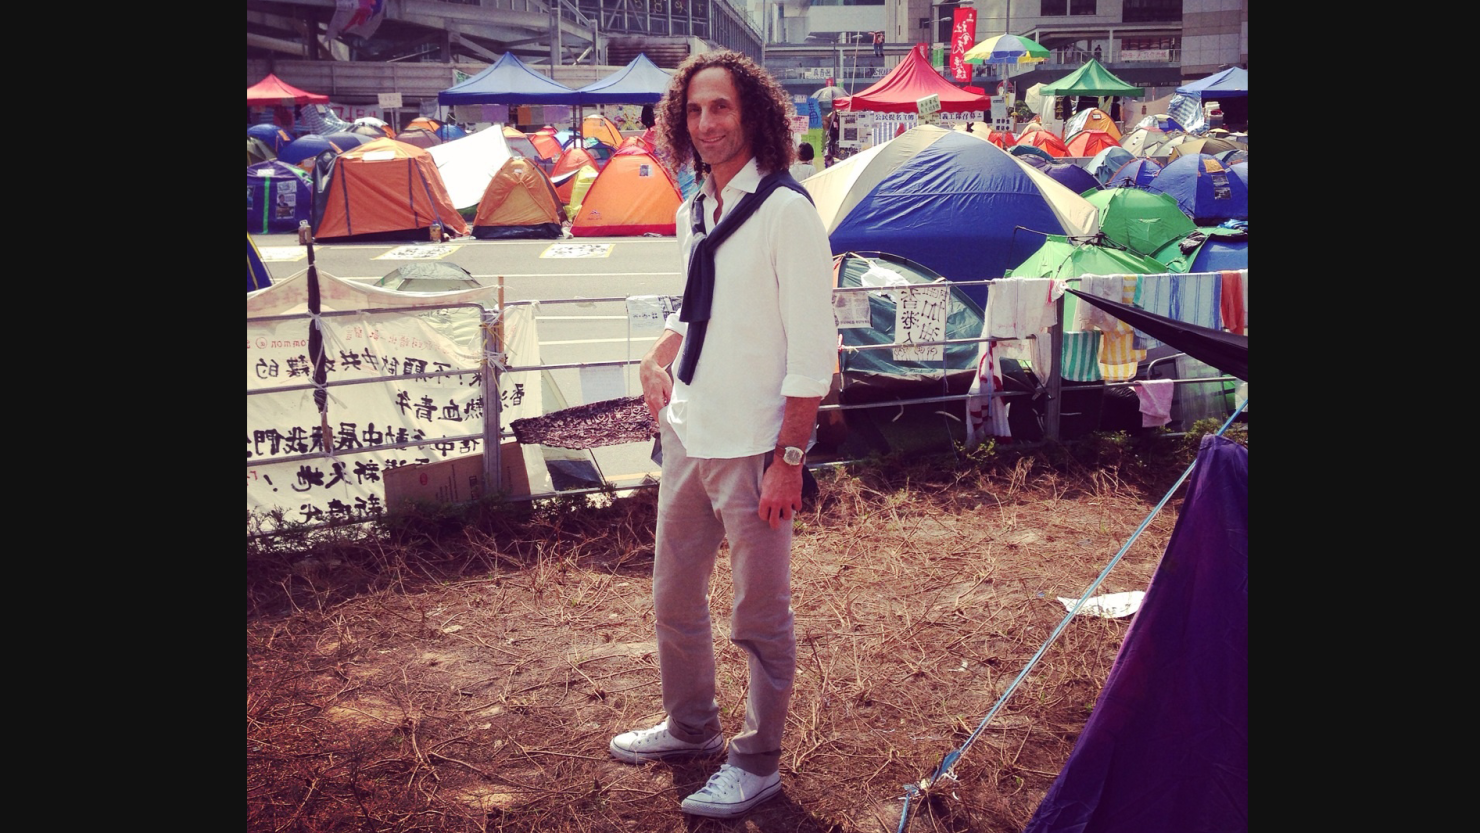 CNN's Elizabeth Joseph saw jazz musician Kenny G walking around the Hong Kong protest site on October 22 and took this photo, which quickly went viral. The musician also took a selfie, which has since been deleted.